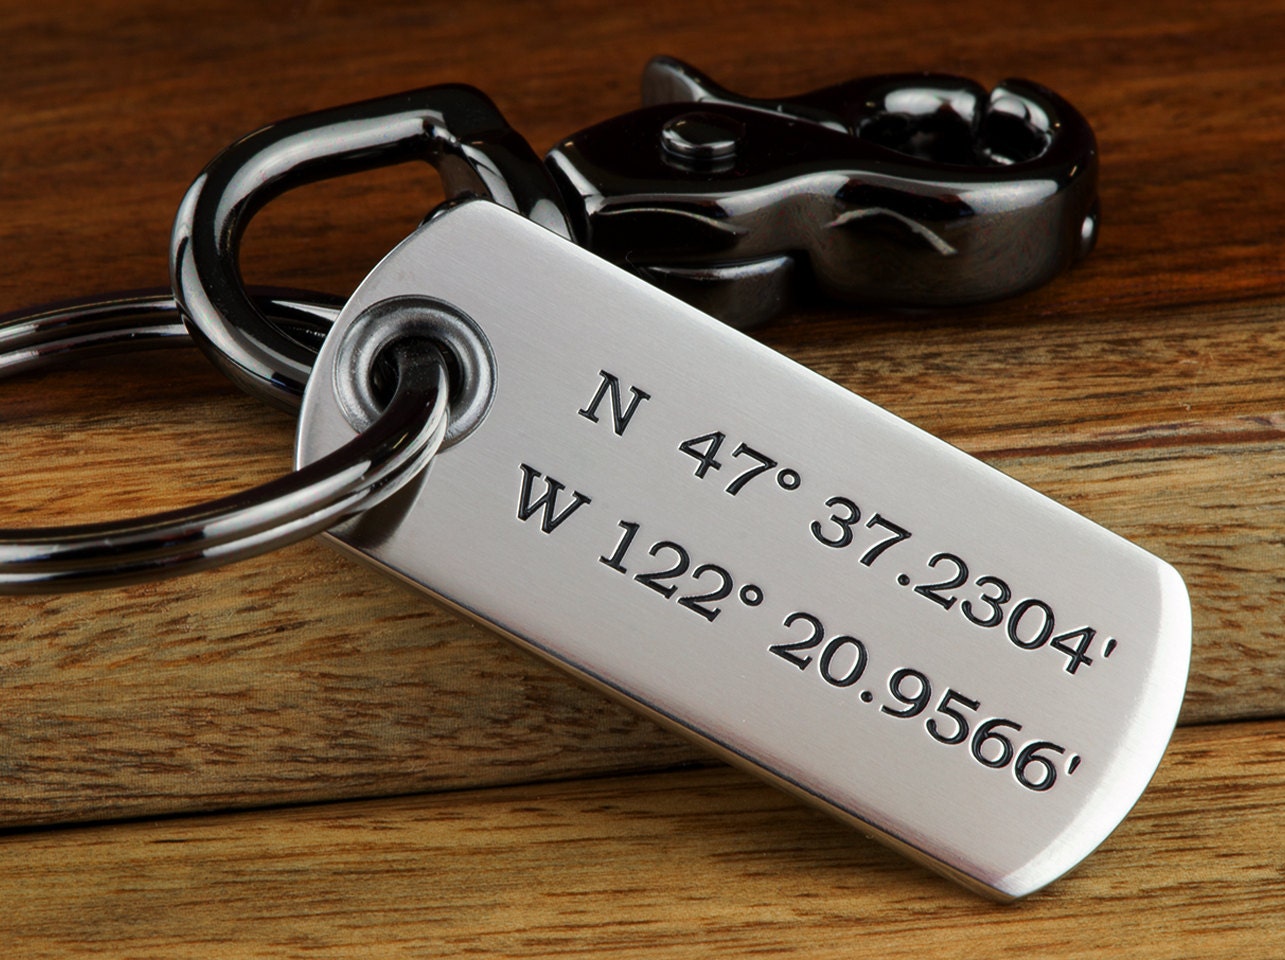 Mens Personalized, Womens Personalized Keychain -Custom Coordinates or ANY TEXT up to 45 Char • Deep Engraved Stainless Steel - Made in USA!